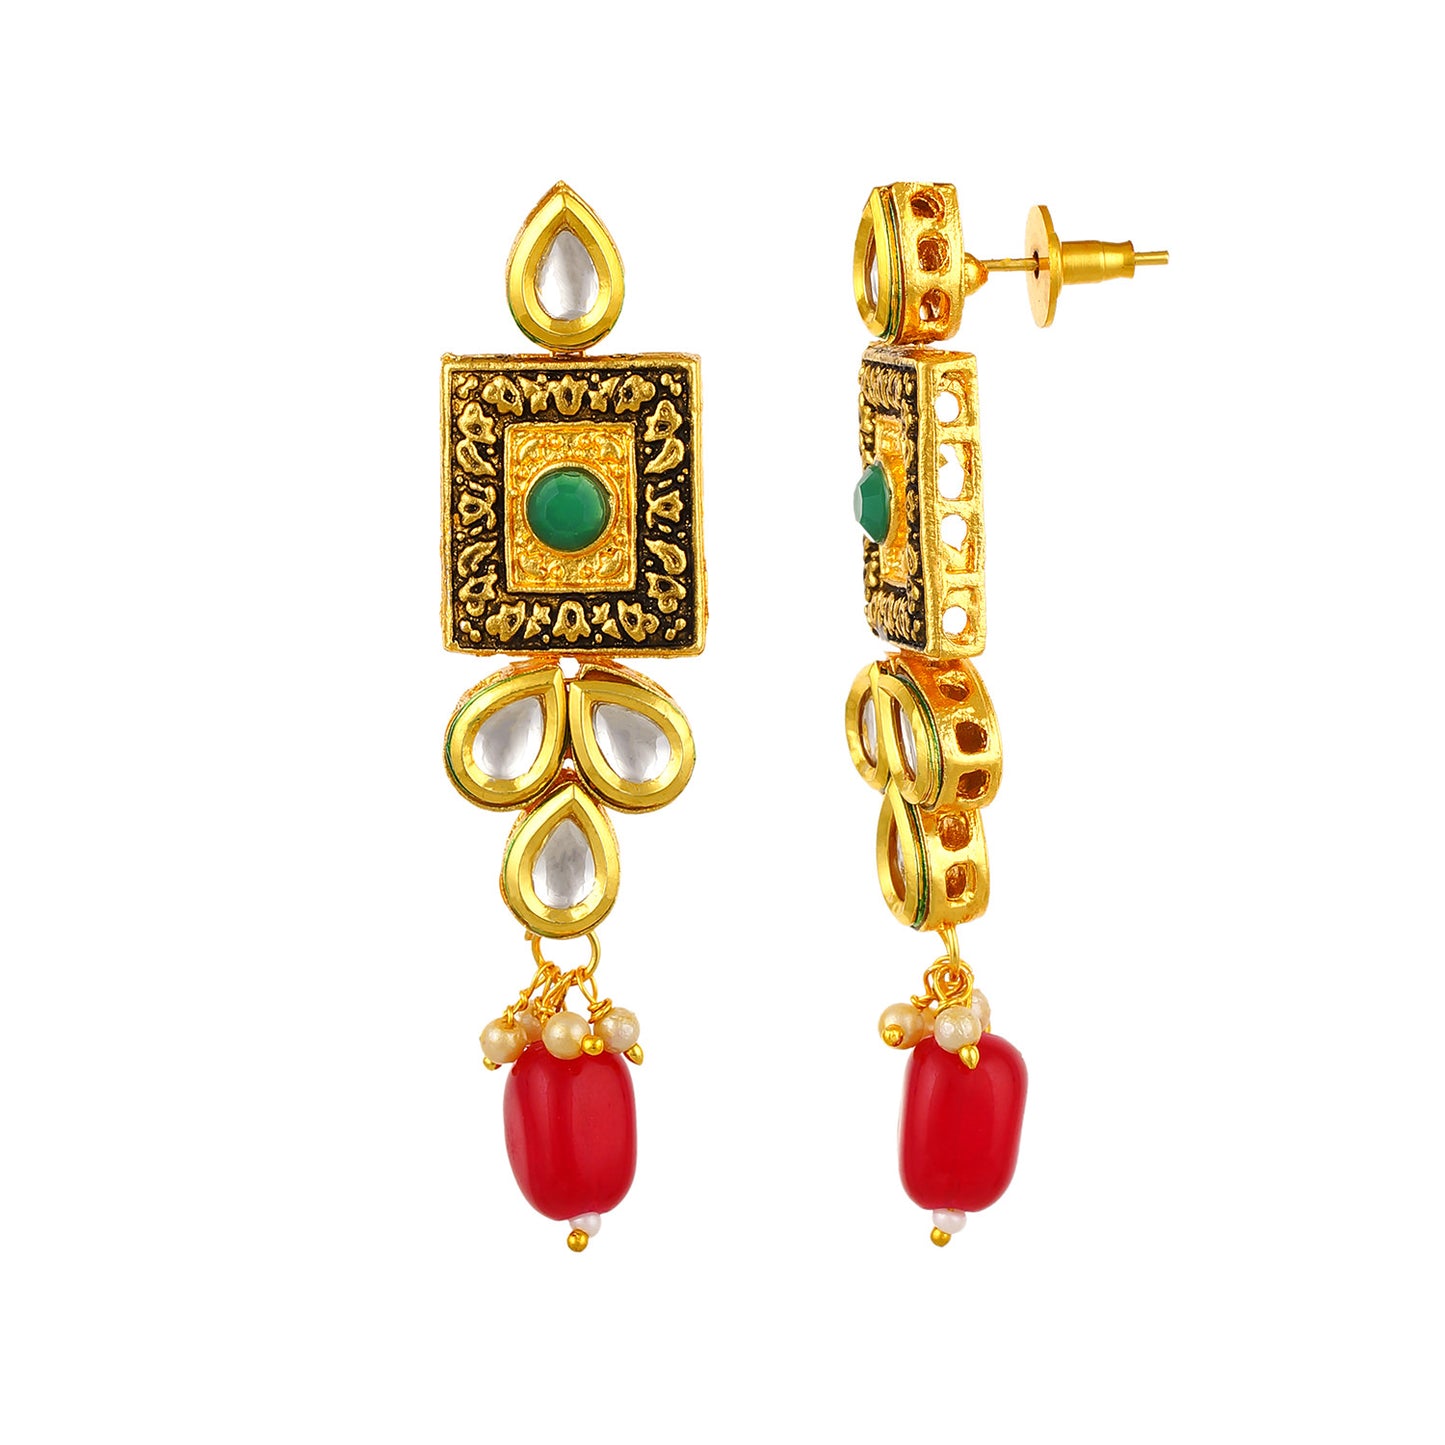 Gold Plated Kundan Meenakari Necklace Earrings Jewelry Set for Girls and Women